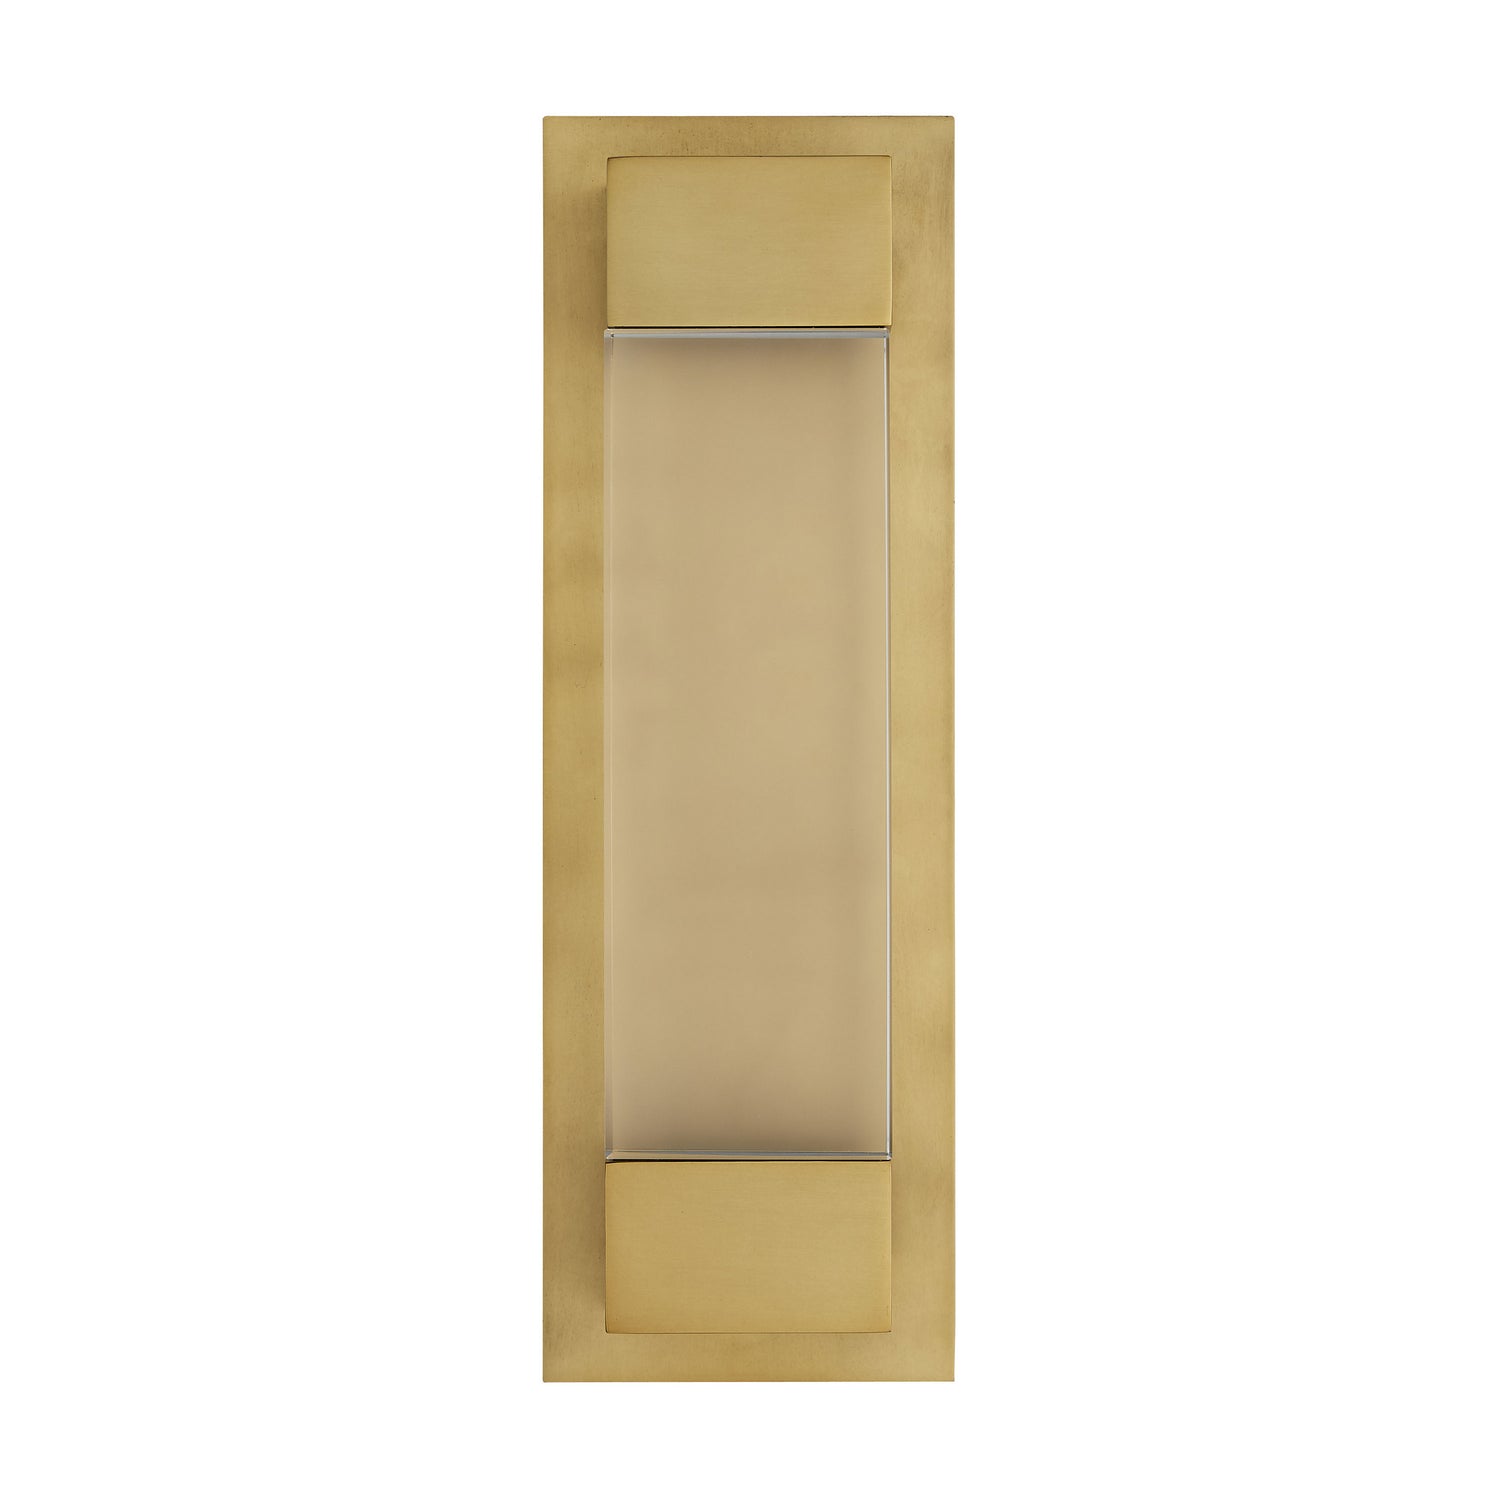 LED Wall Sconce from the Charlie collection in Antique Brass finish